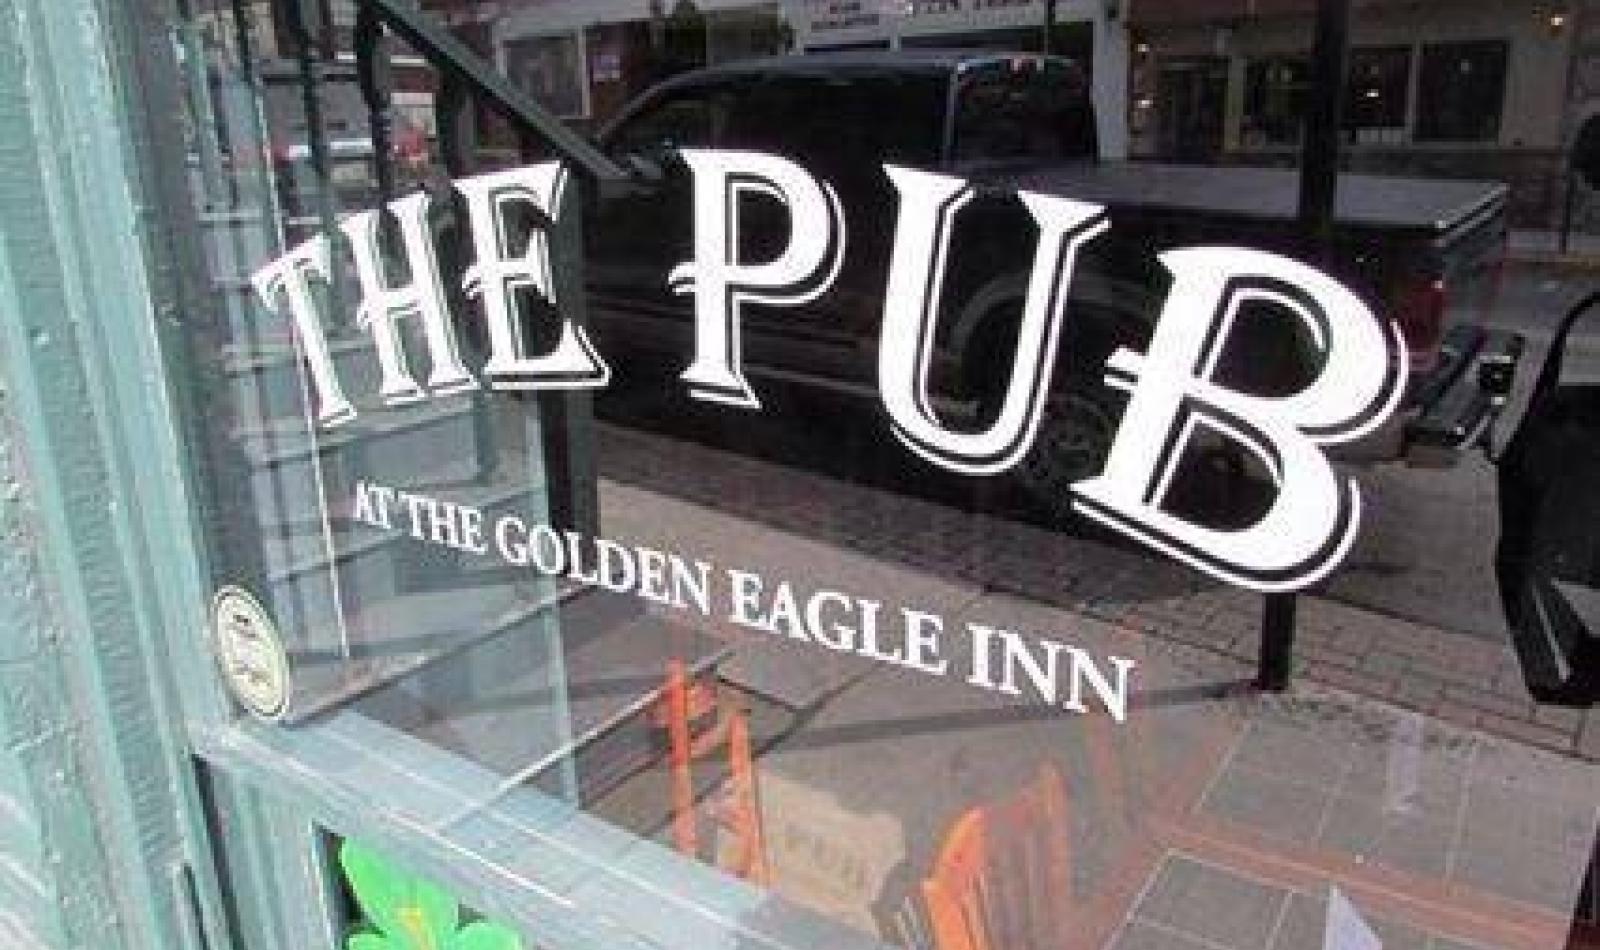 The Golden Eagle Inn Pub in Downtown Bedford PA